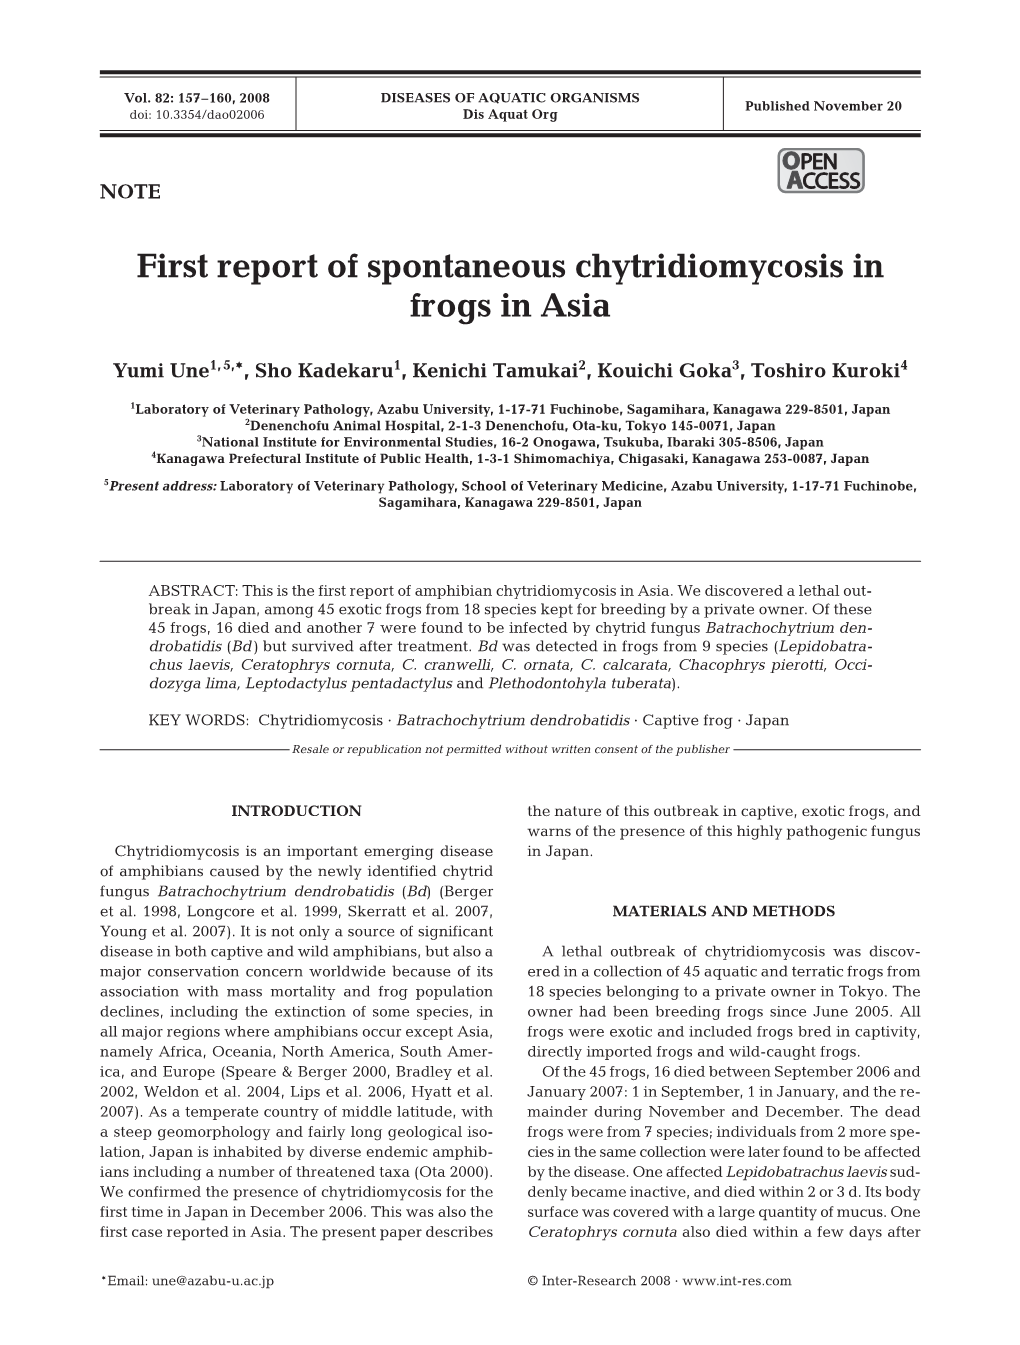 First Report of Spontaneous Chytridiomycosis in Frogs in Asia